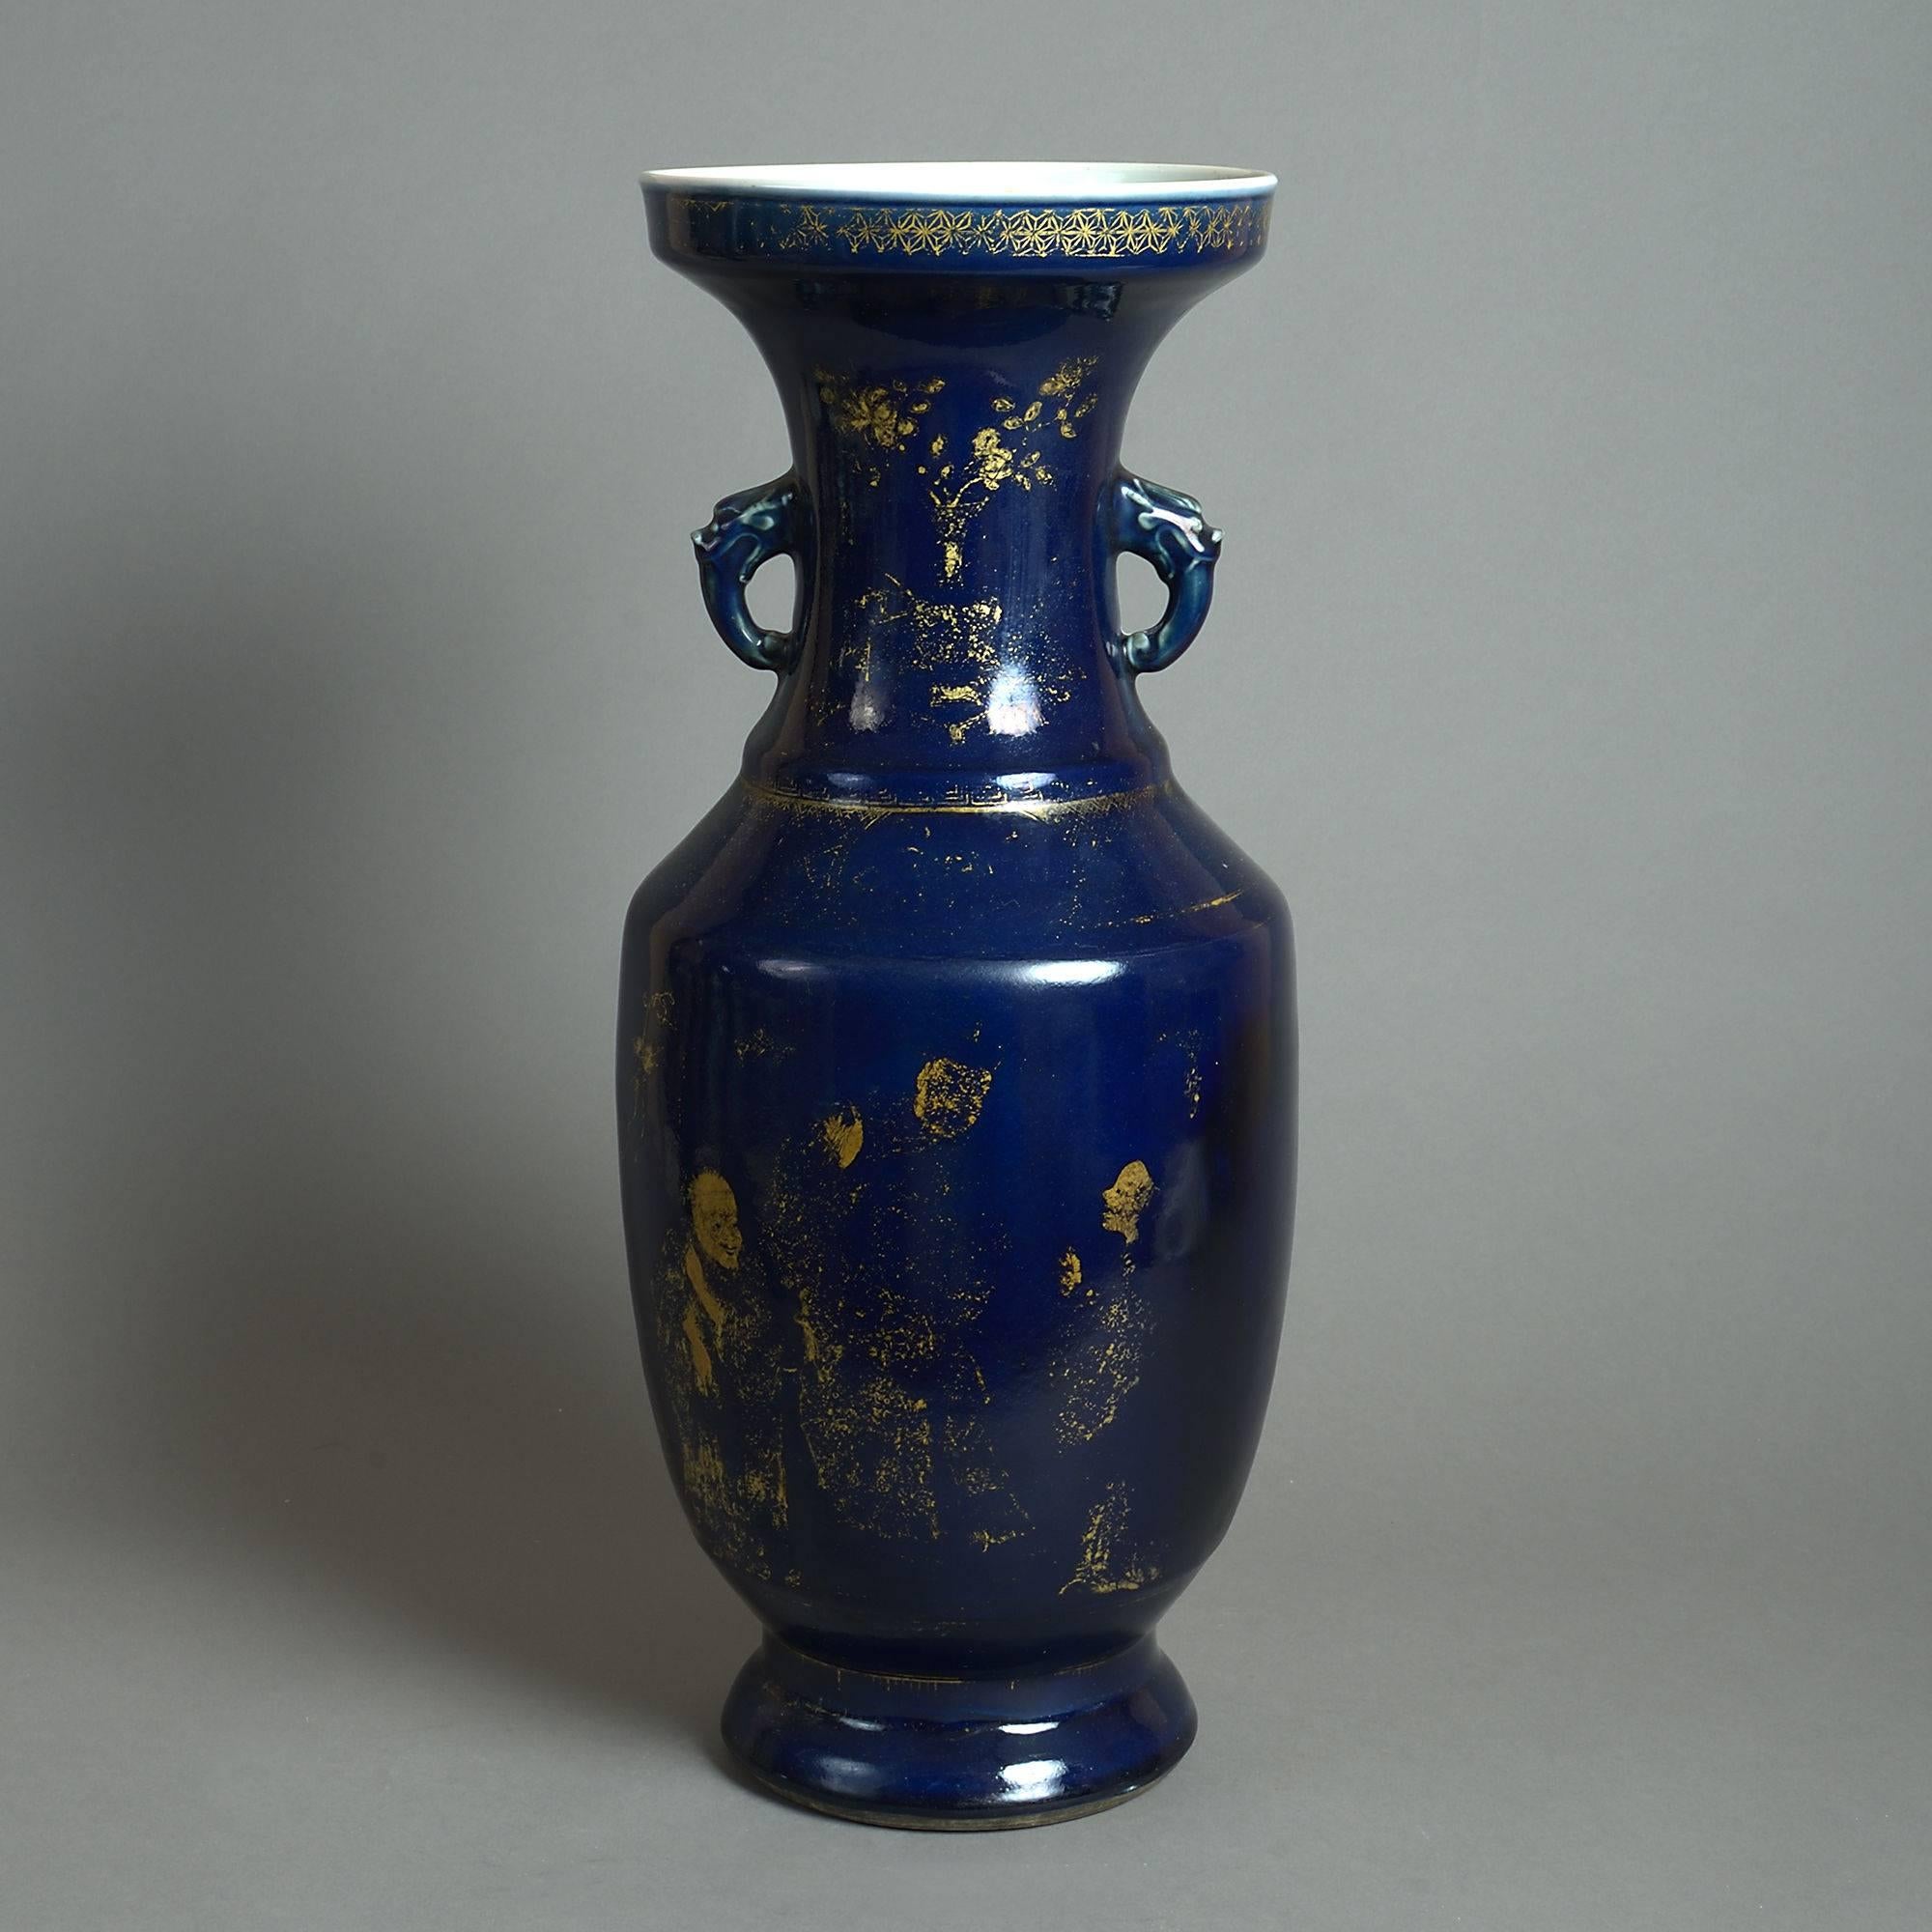 A late 19th century porcelain vase of large-scale, the trumpet neck with handles, the body with gilded decoration upon a powder blue ground. 

The body with restorations.